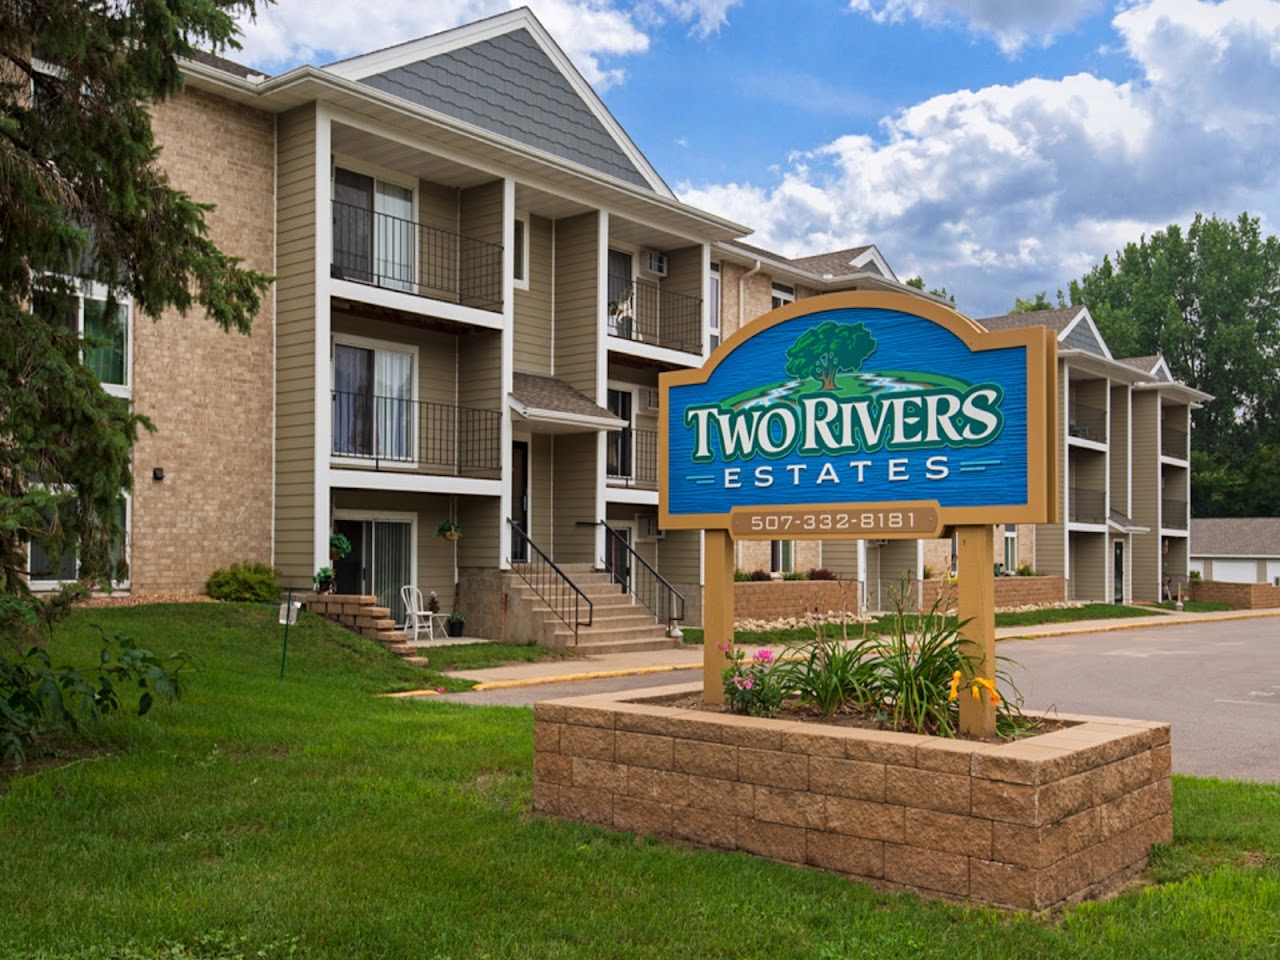 Photo of 2 RIVERS APARTMENTS (FKA PARK AVE APTS). Affordable housing located at 2426 PARK AVE FARIBAULT, MN 55021